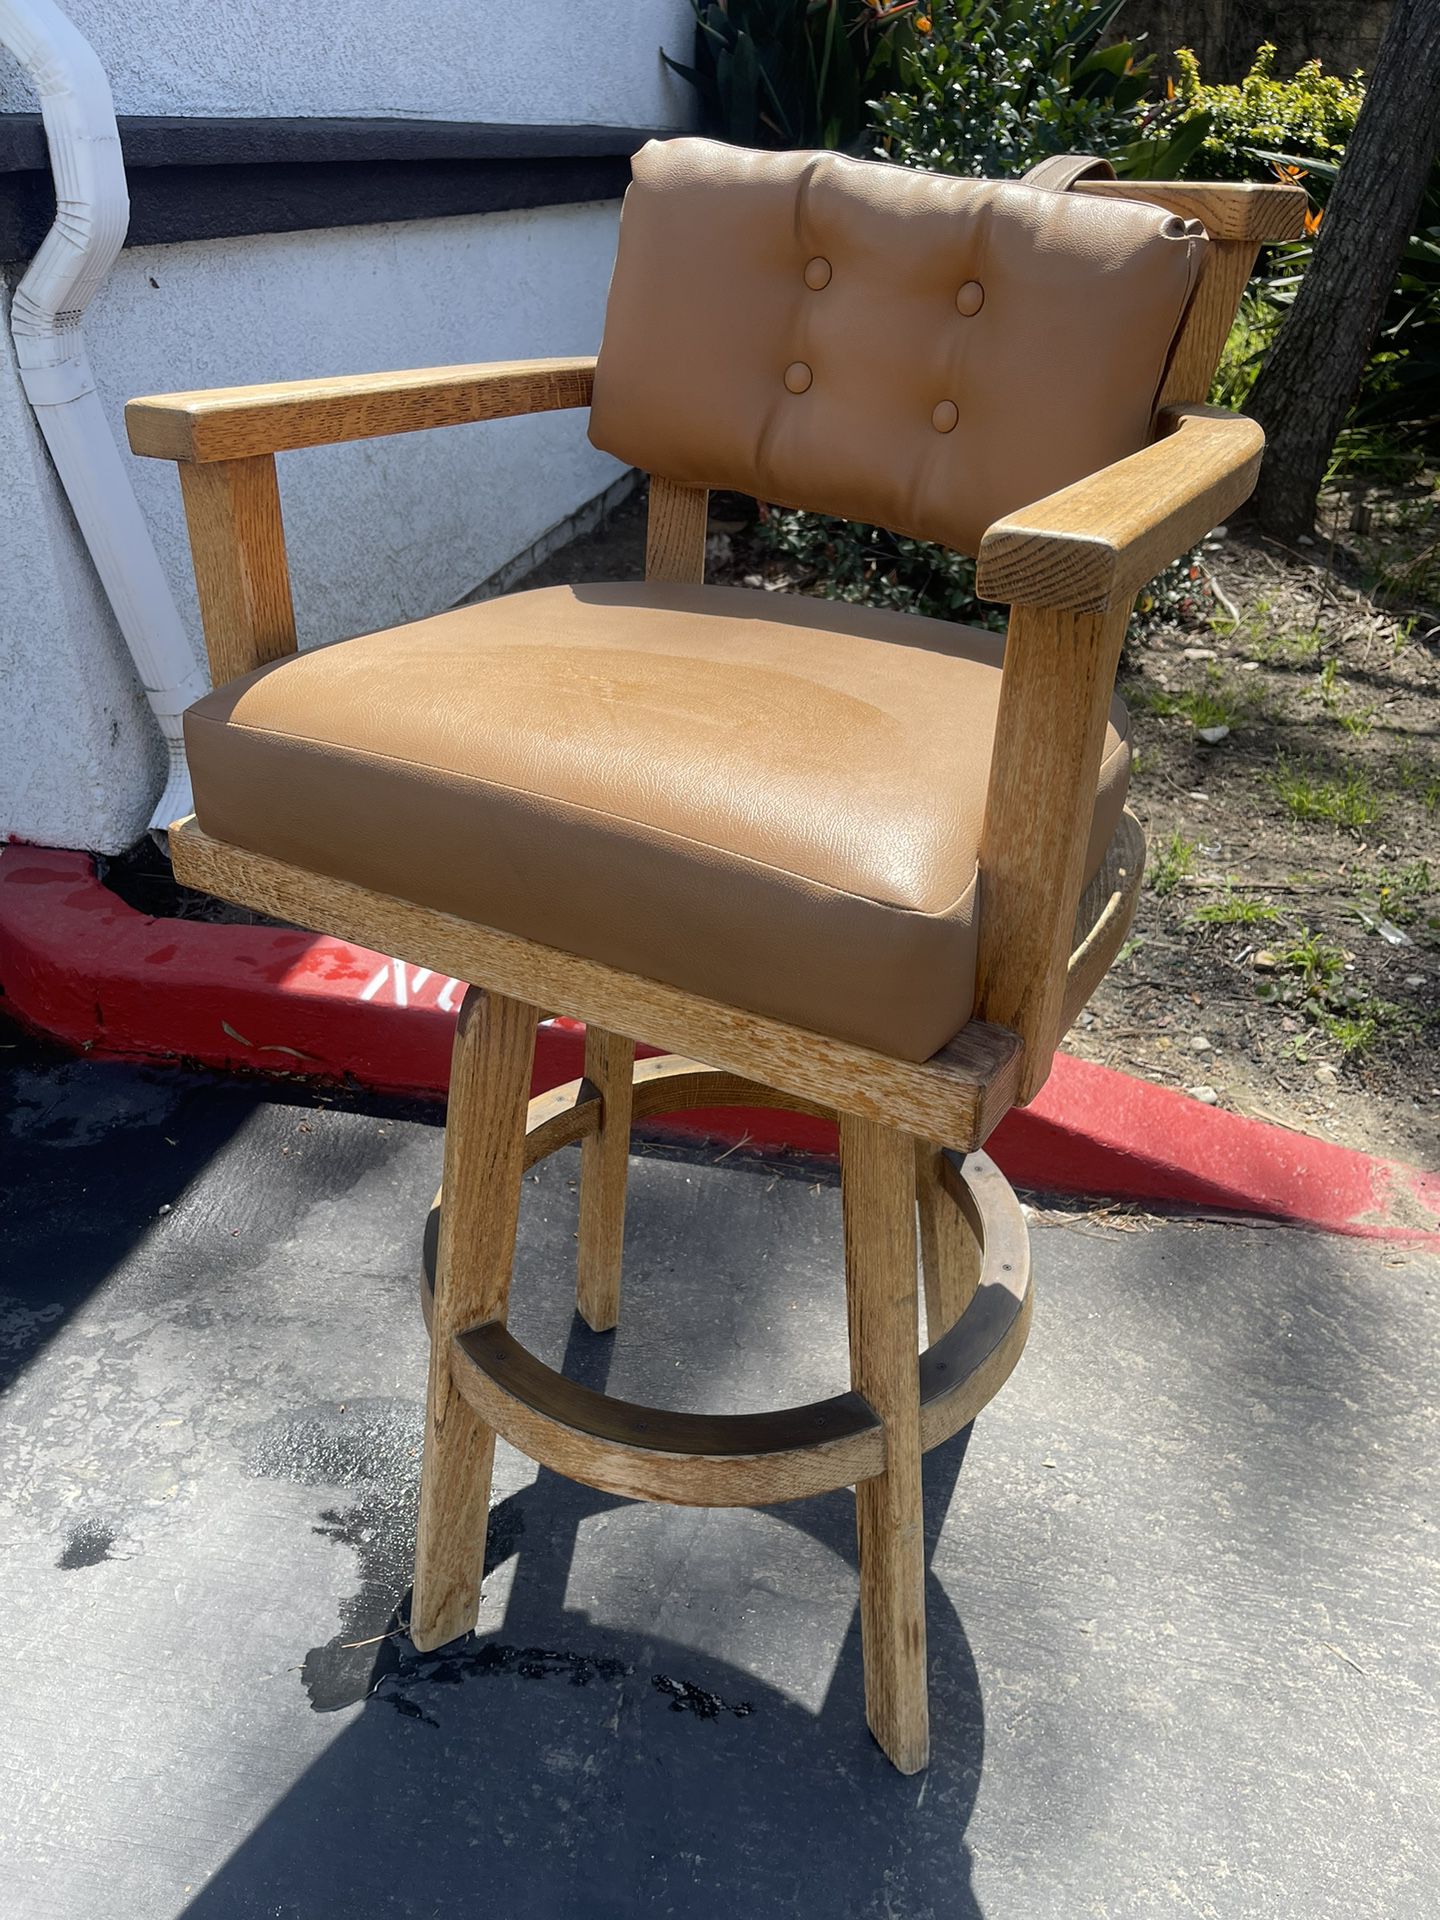 Wooden Swiveling Bar Stool With Arm Rest !